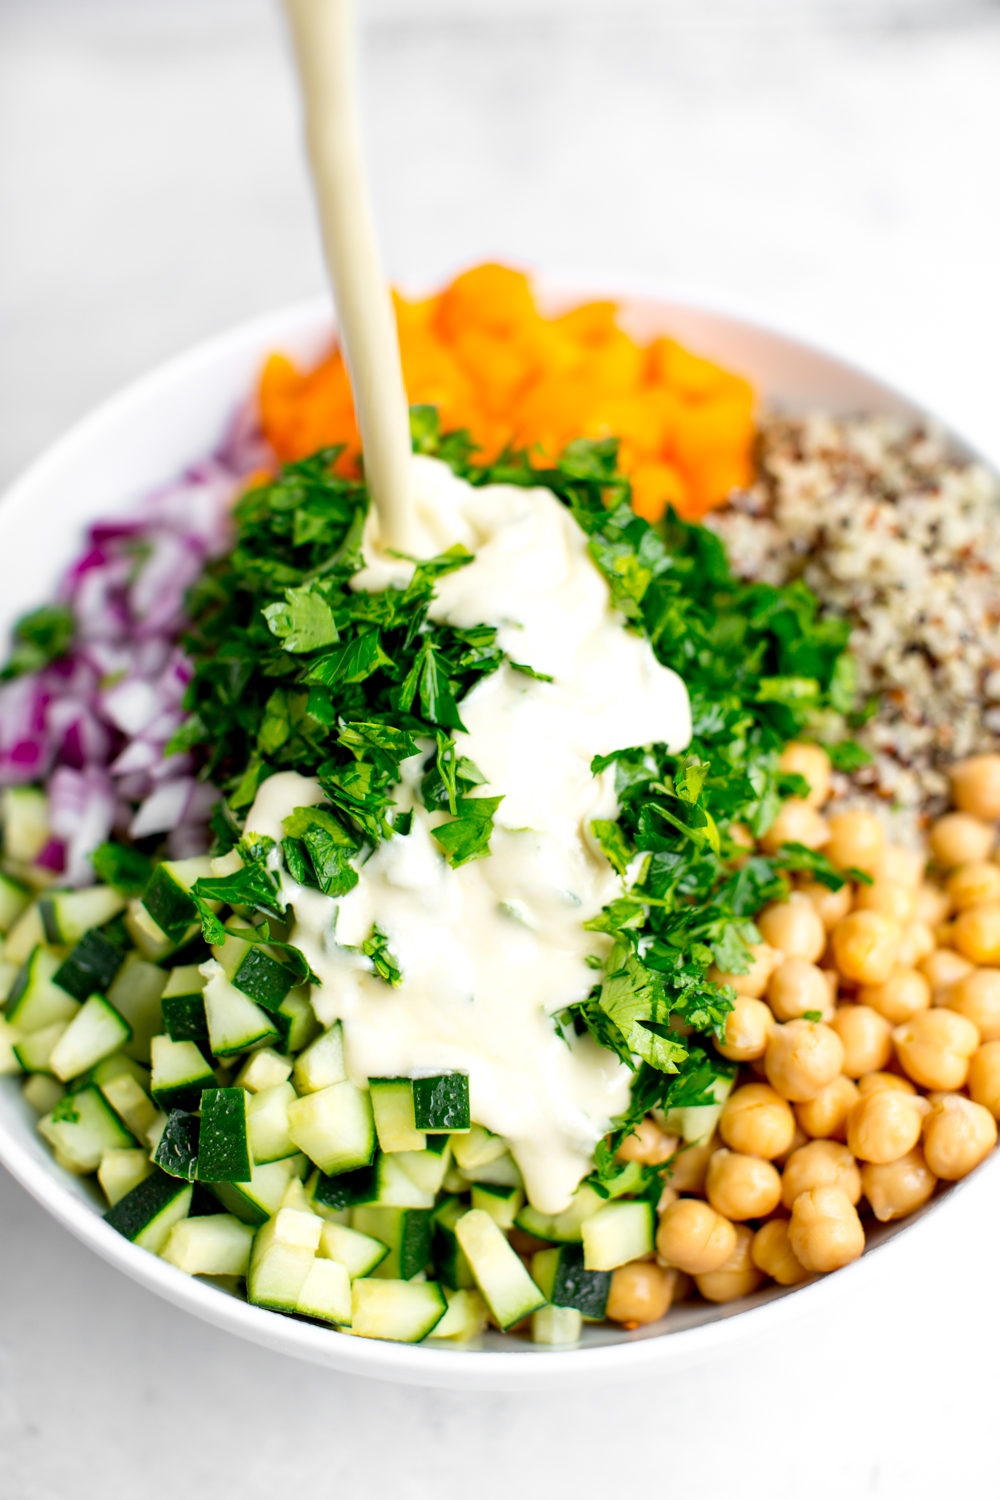 Creamy feta dressing being poured onto ingredients for mediterranean quinoa salad made with orange bell pepper, red onions, parsley, tricolored quinoa, cucumbers and chickpeas